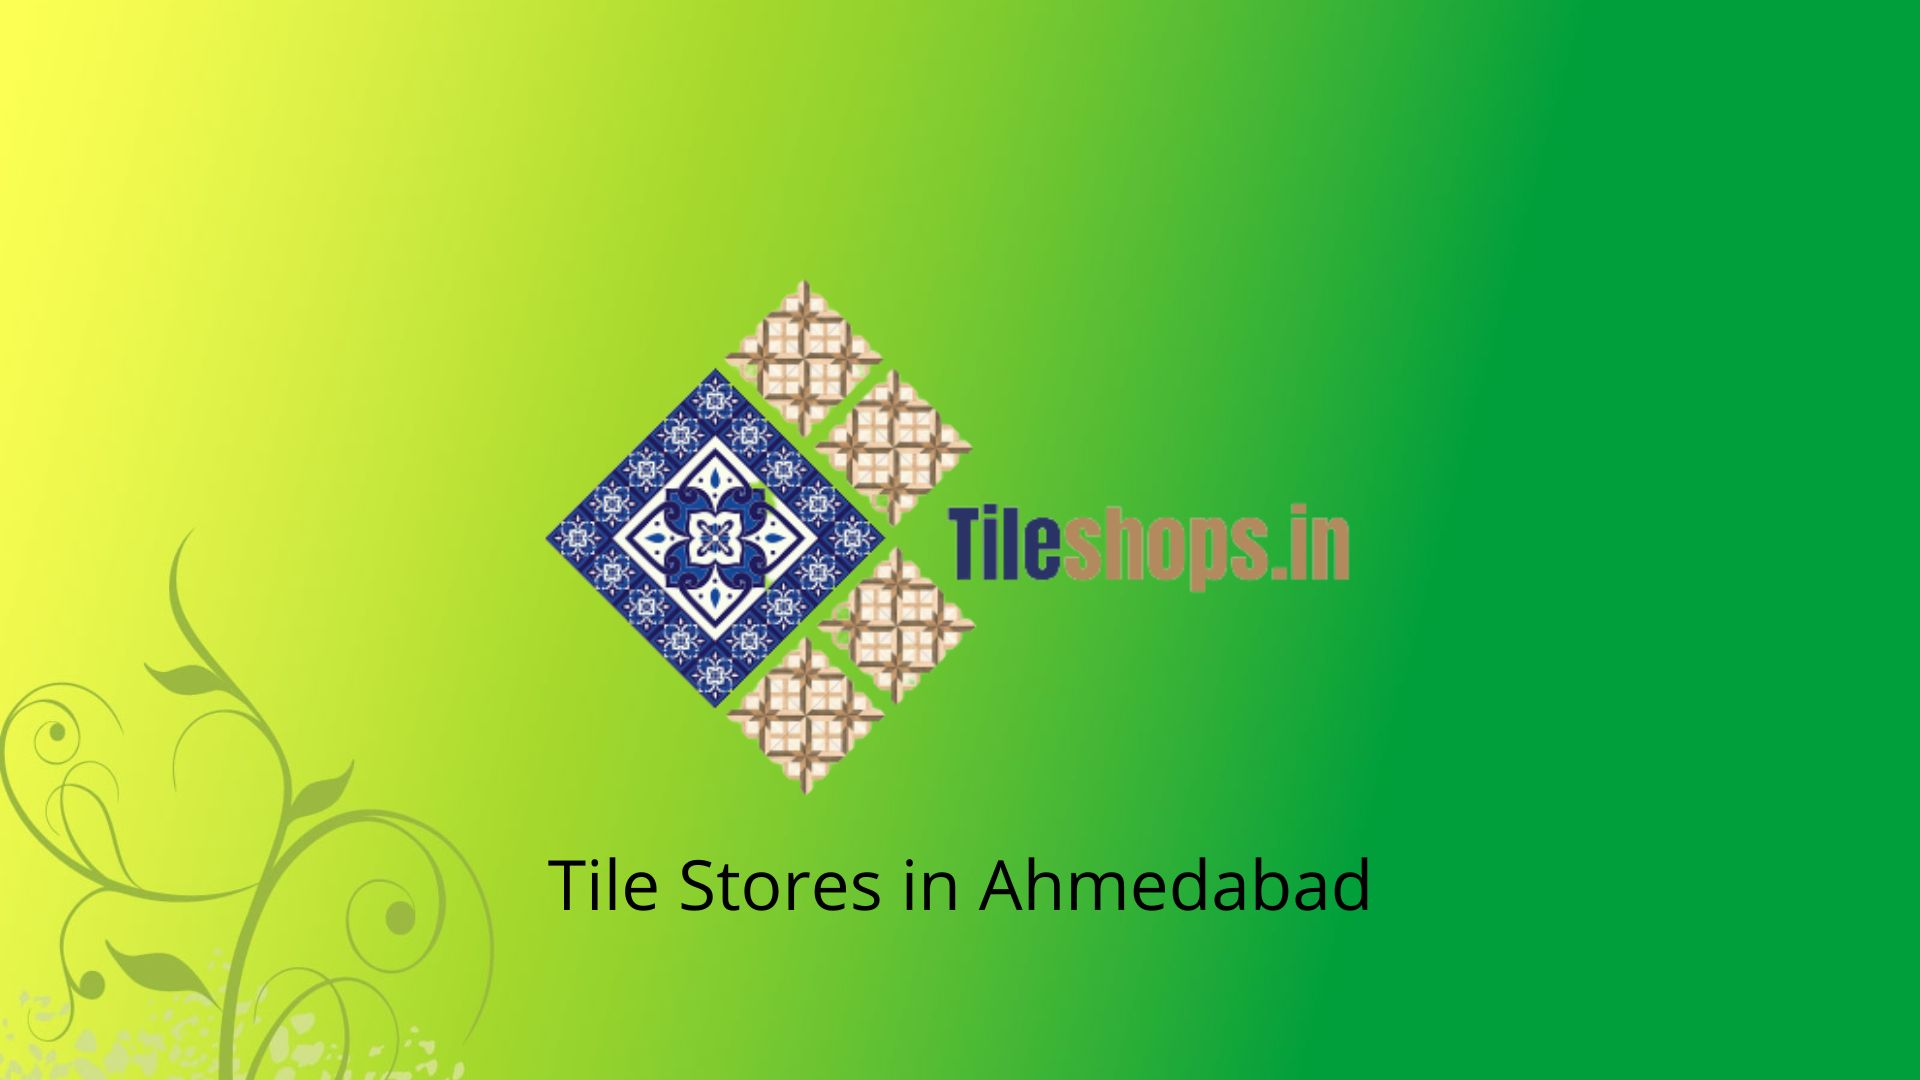 Tile Stores in Ahmedabad